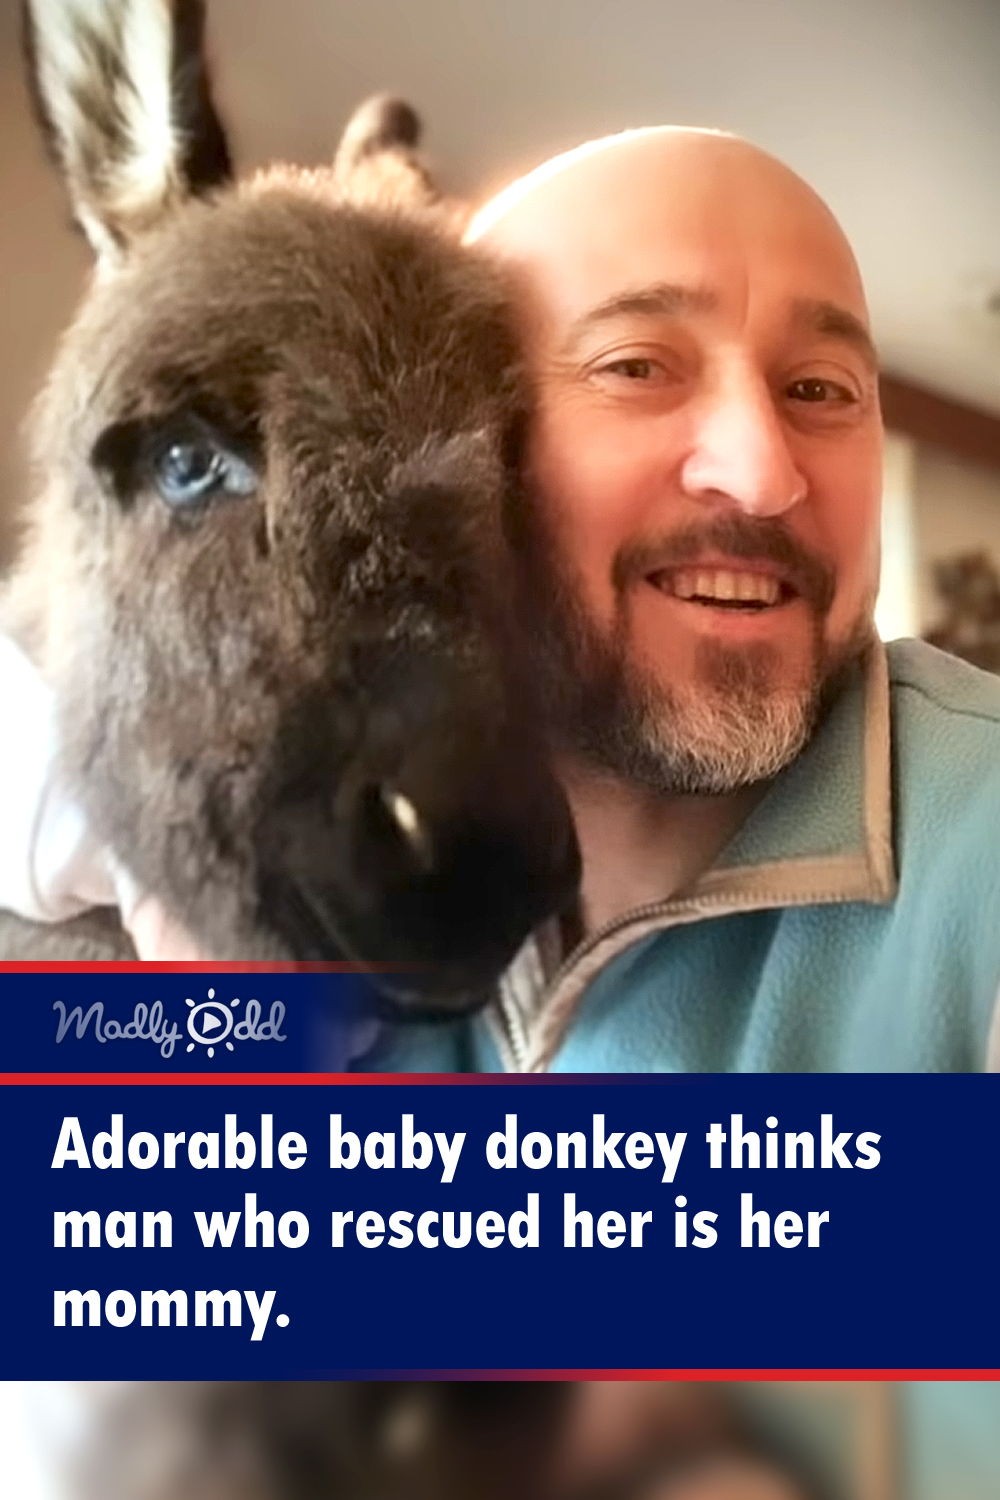 Adorable baby donkey thinks man who rescued her is her mommy